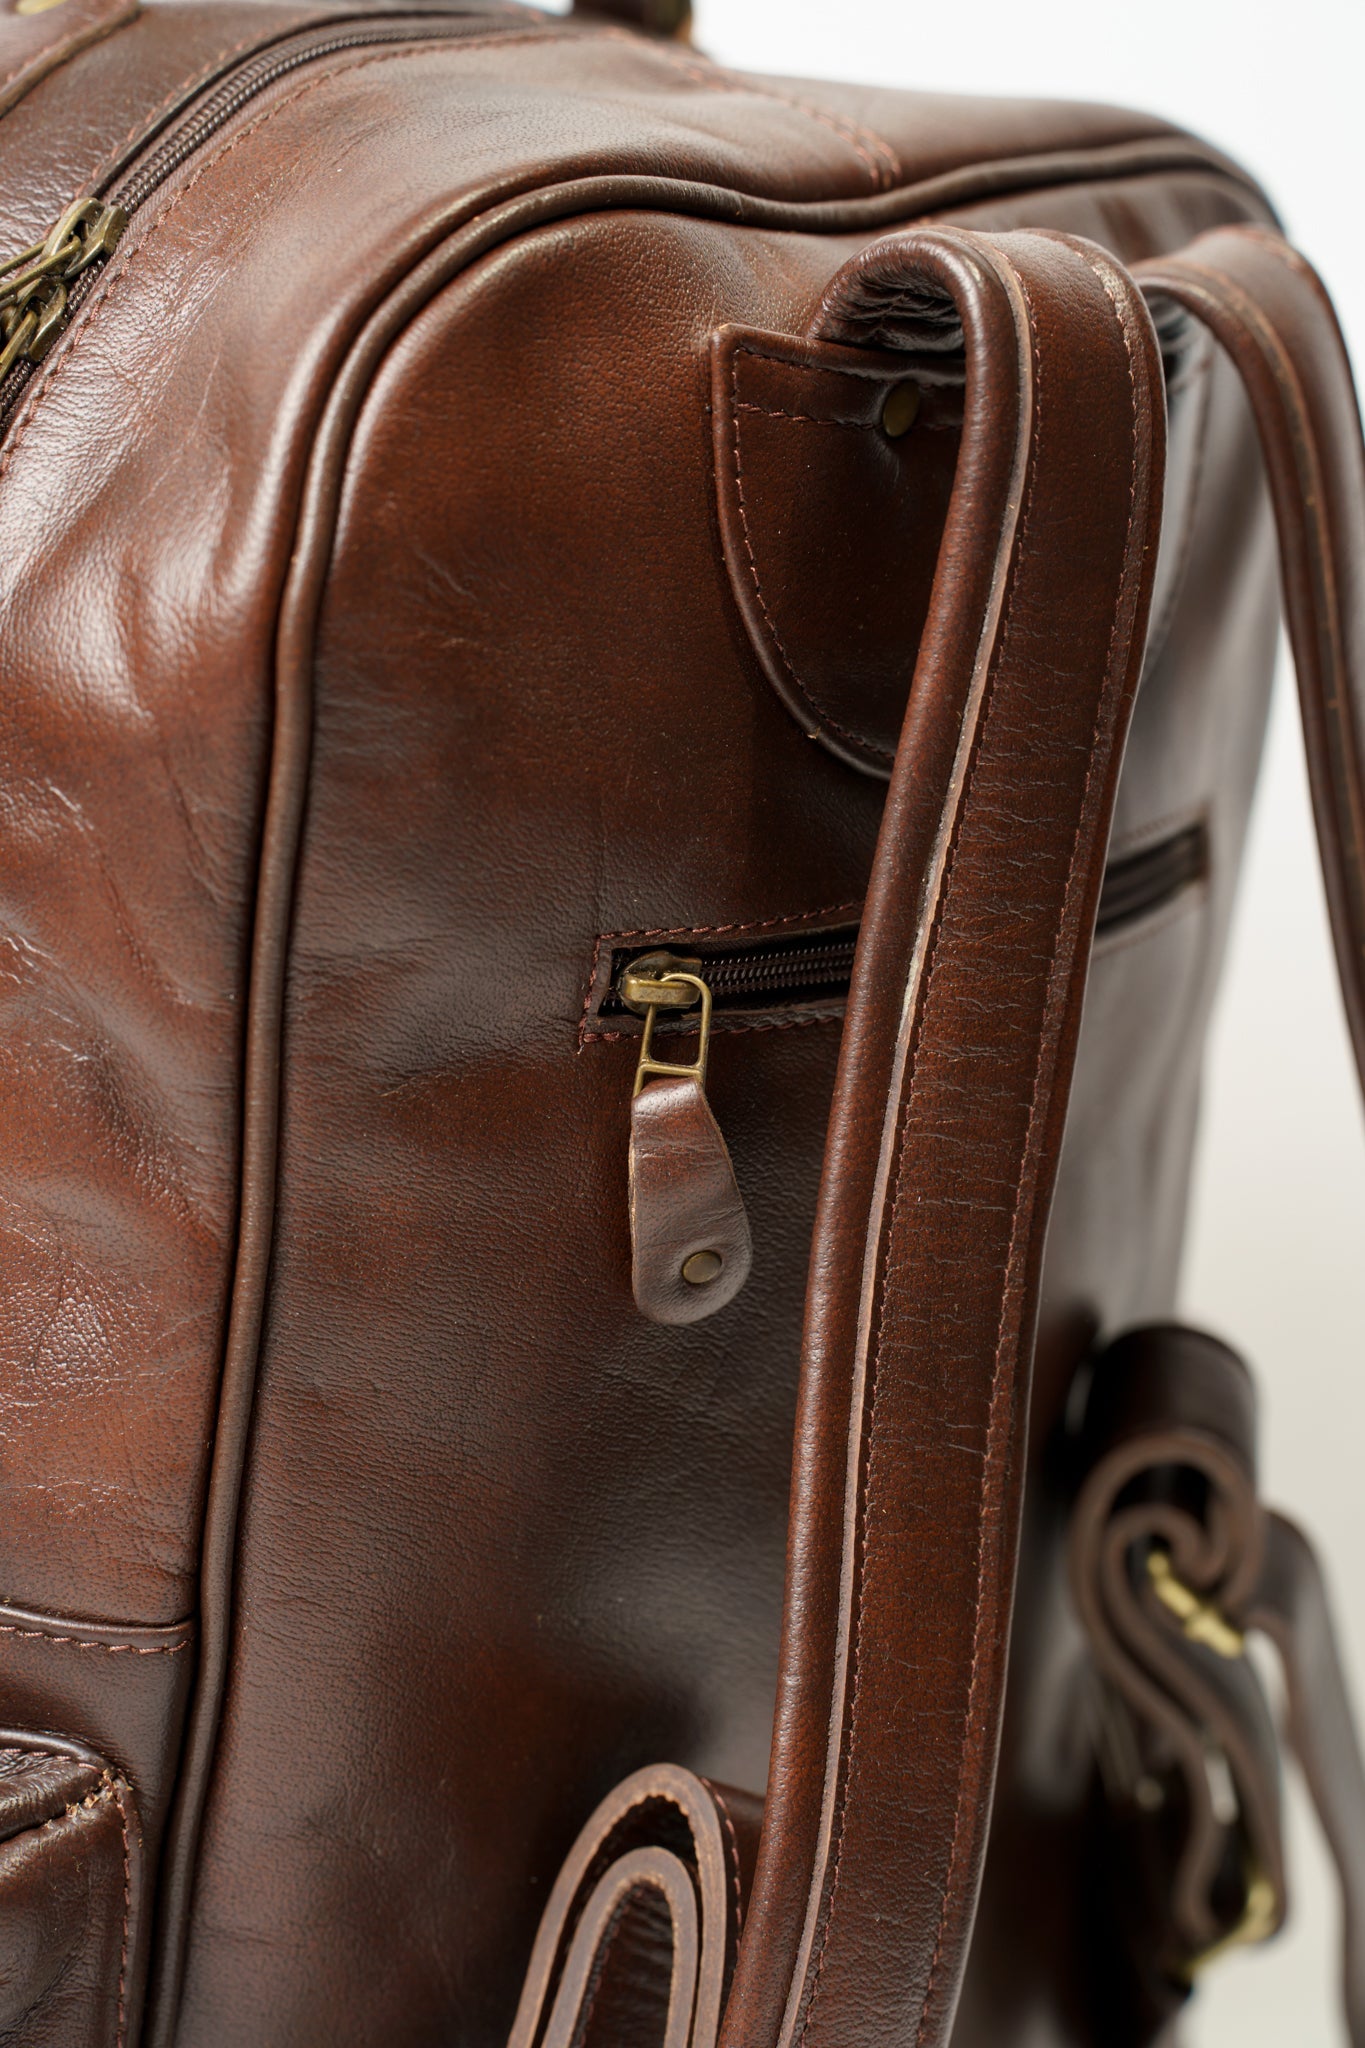 Rear view of Chamra's brown leather backpack with adjustable shoulder straps and a compact compartment fit to hold phones, wallets, passports, or other small items.